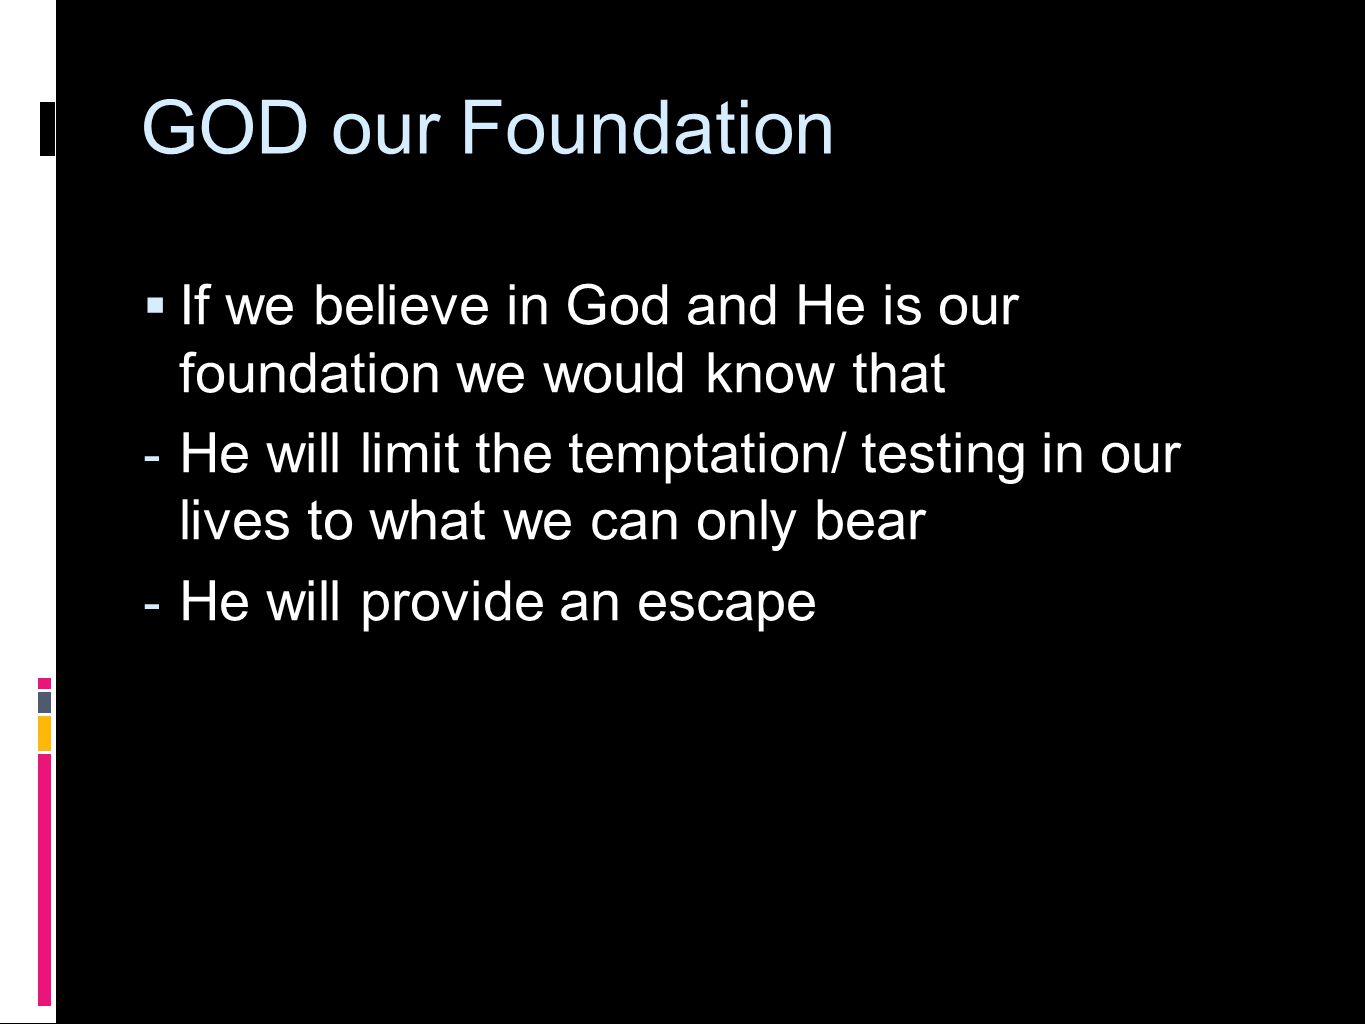 GOD our Foundation  If we believe in God and He is our foundation we would know that  He will limit the temptation/ testing in our lives to what we can only bear  He will provide an escape